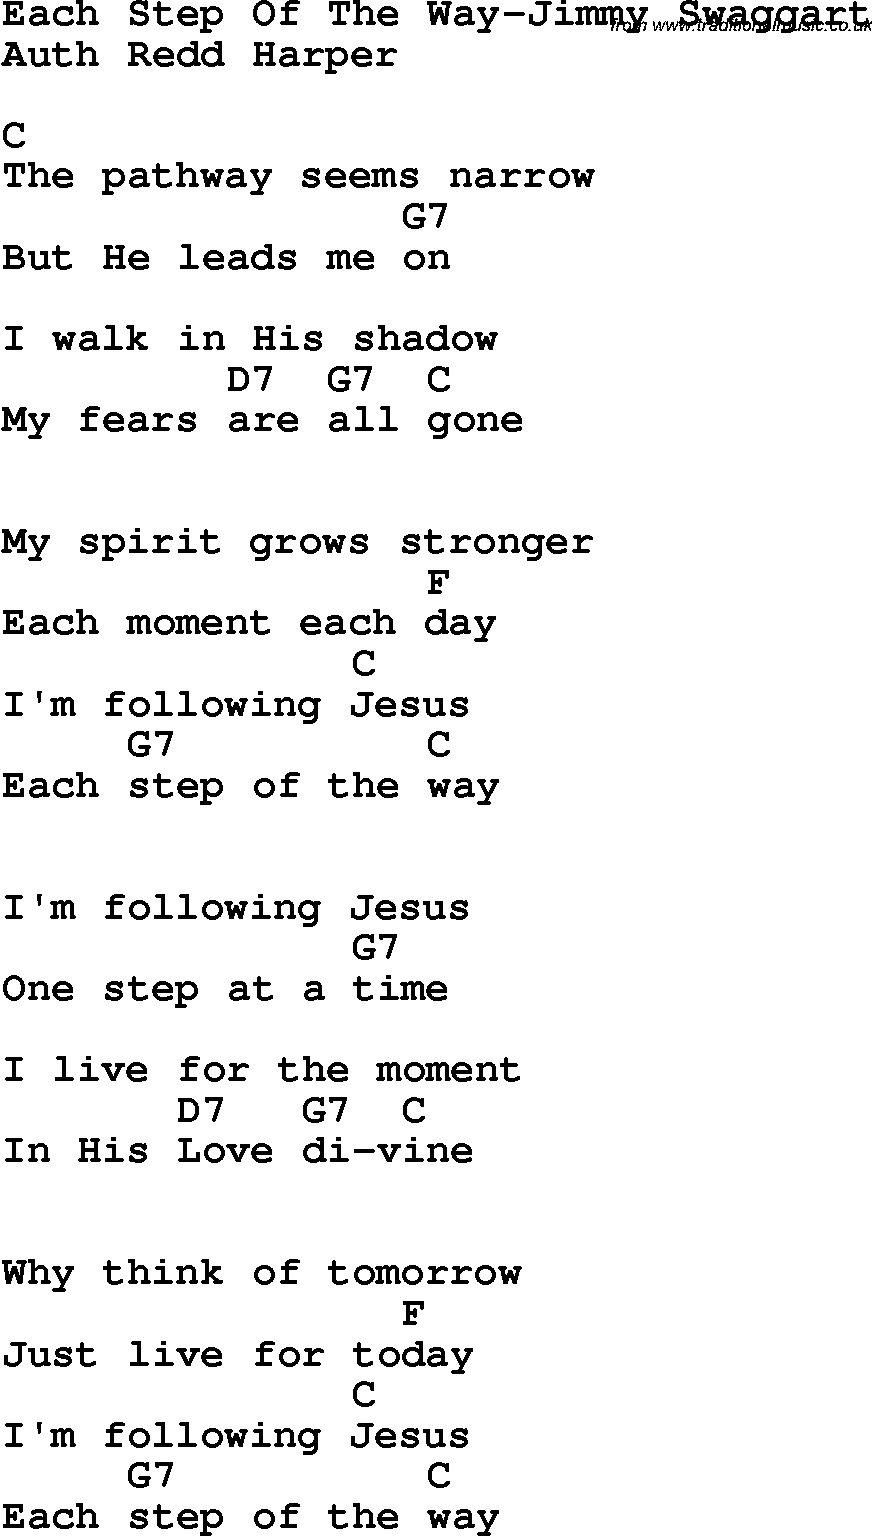 Country, Southern and Bluegrass Gospel Song Each Step Of The Way-Jimmy Swaggart lyrics and chords